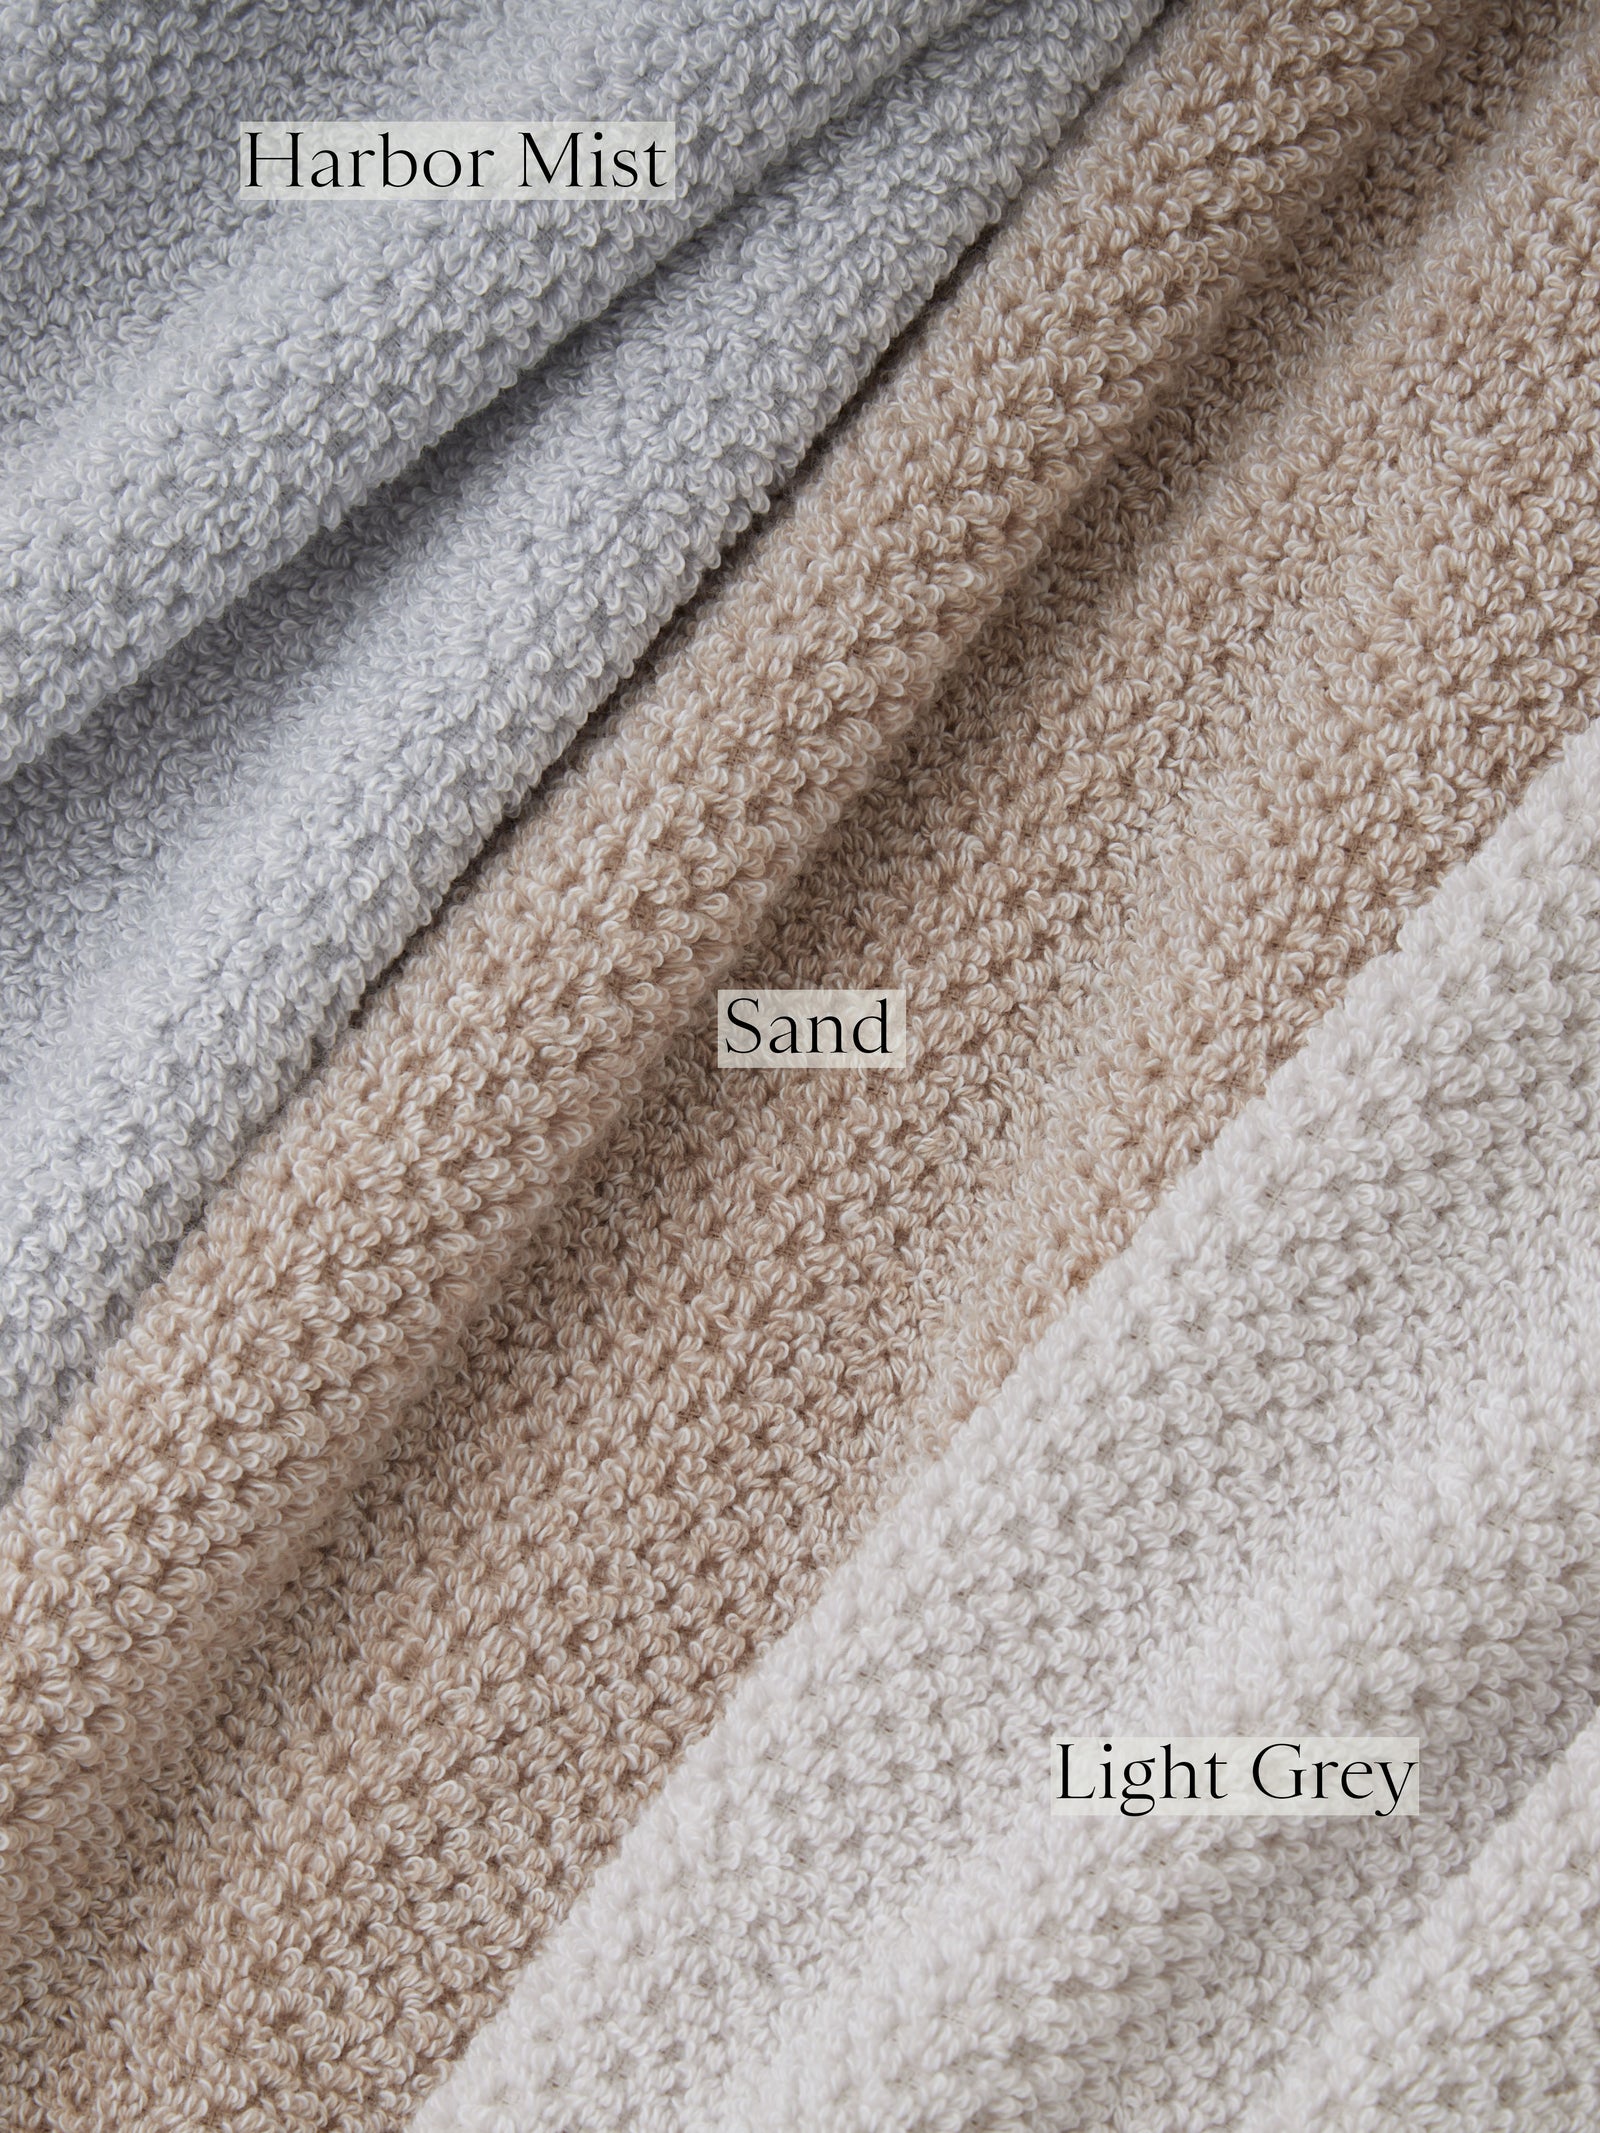 Nantucket Bath Towels in the colors Heathered Light Grey, Heathered Sand, and Heathered Harbor Mist. Photo of Nantucket Bath Towels taken as a close up of the towels. Only the towels can be seen